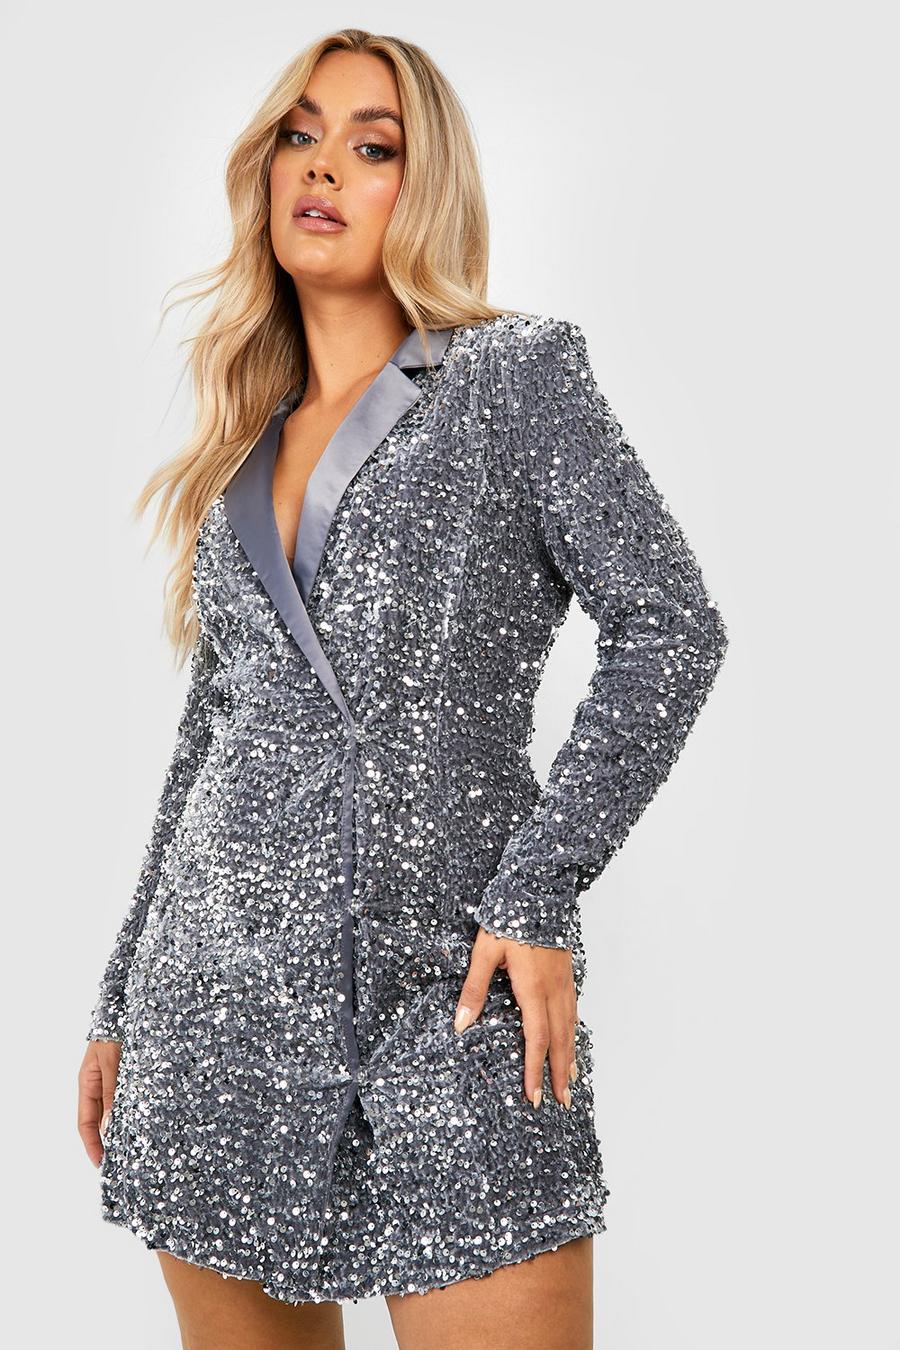 Silver Plus Velvet Sequin Wrap Blazer Dress. holiday party outfit ideas. christmas party outfit. new years eve party outfit ideas. sequin party outfit ideas. 